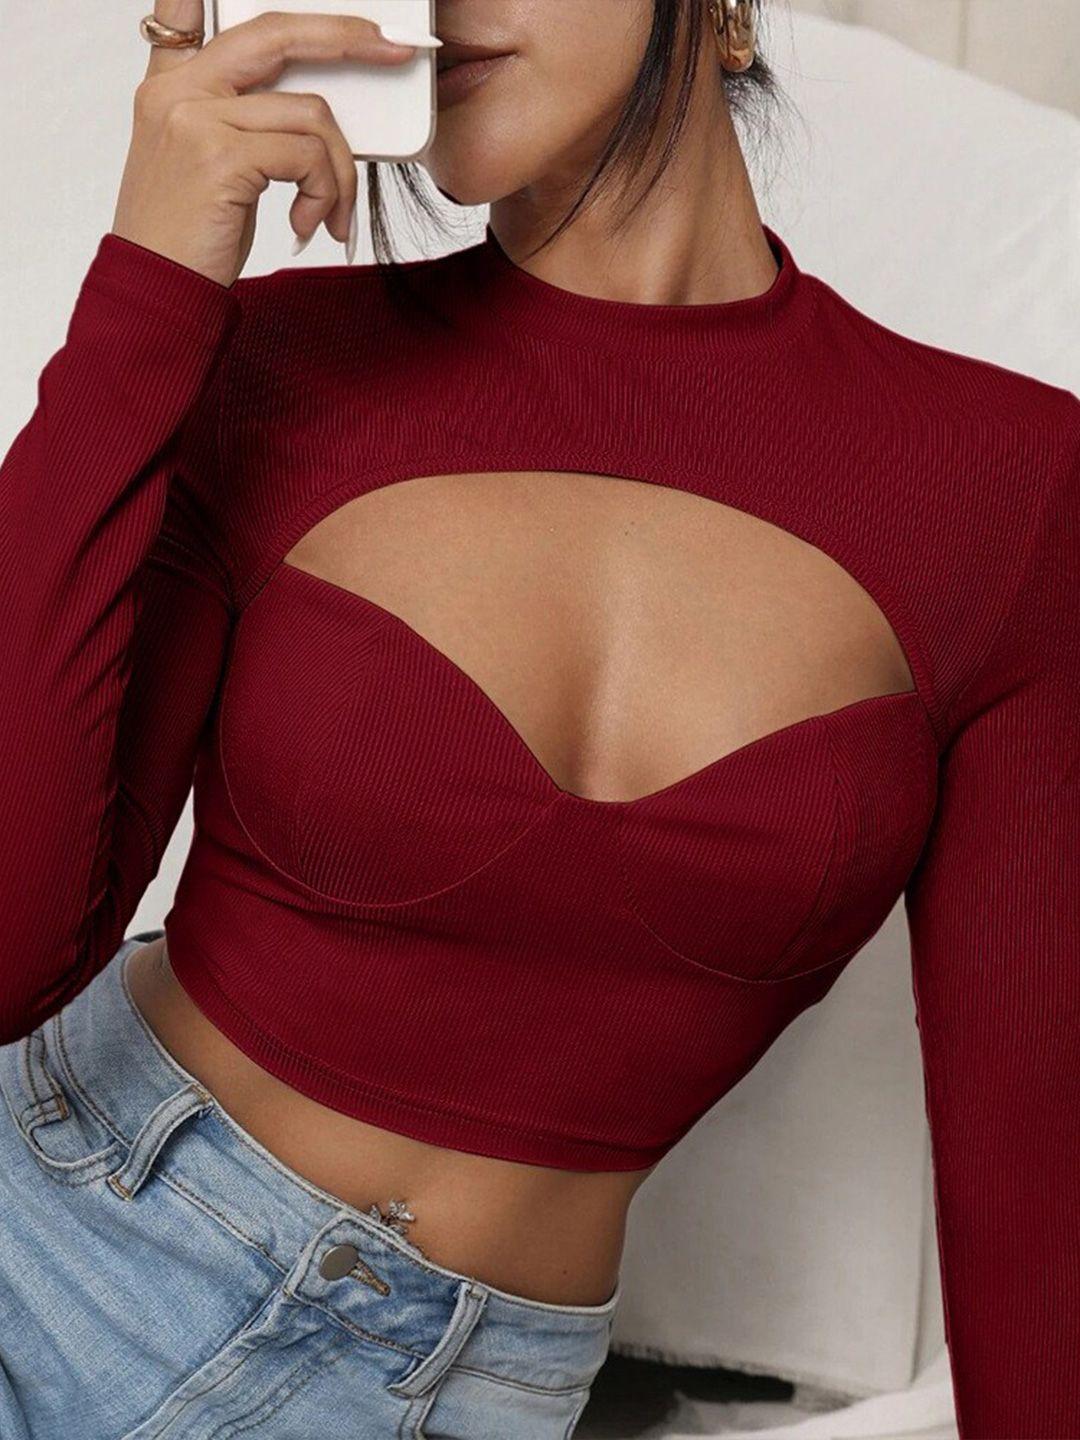 stylecast maroon high neck cut out detail fitted crop top